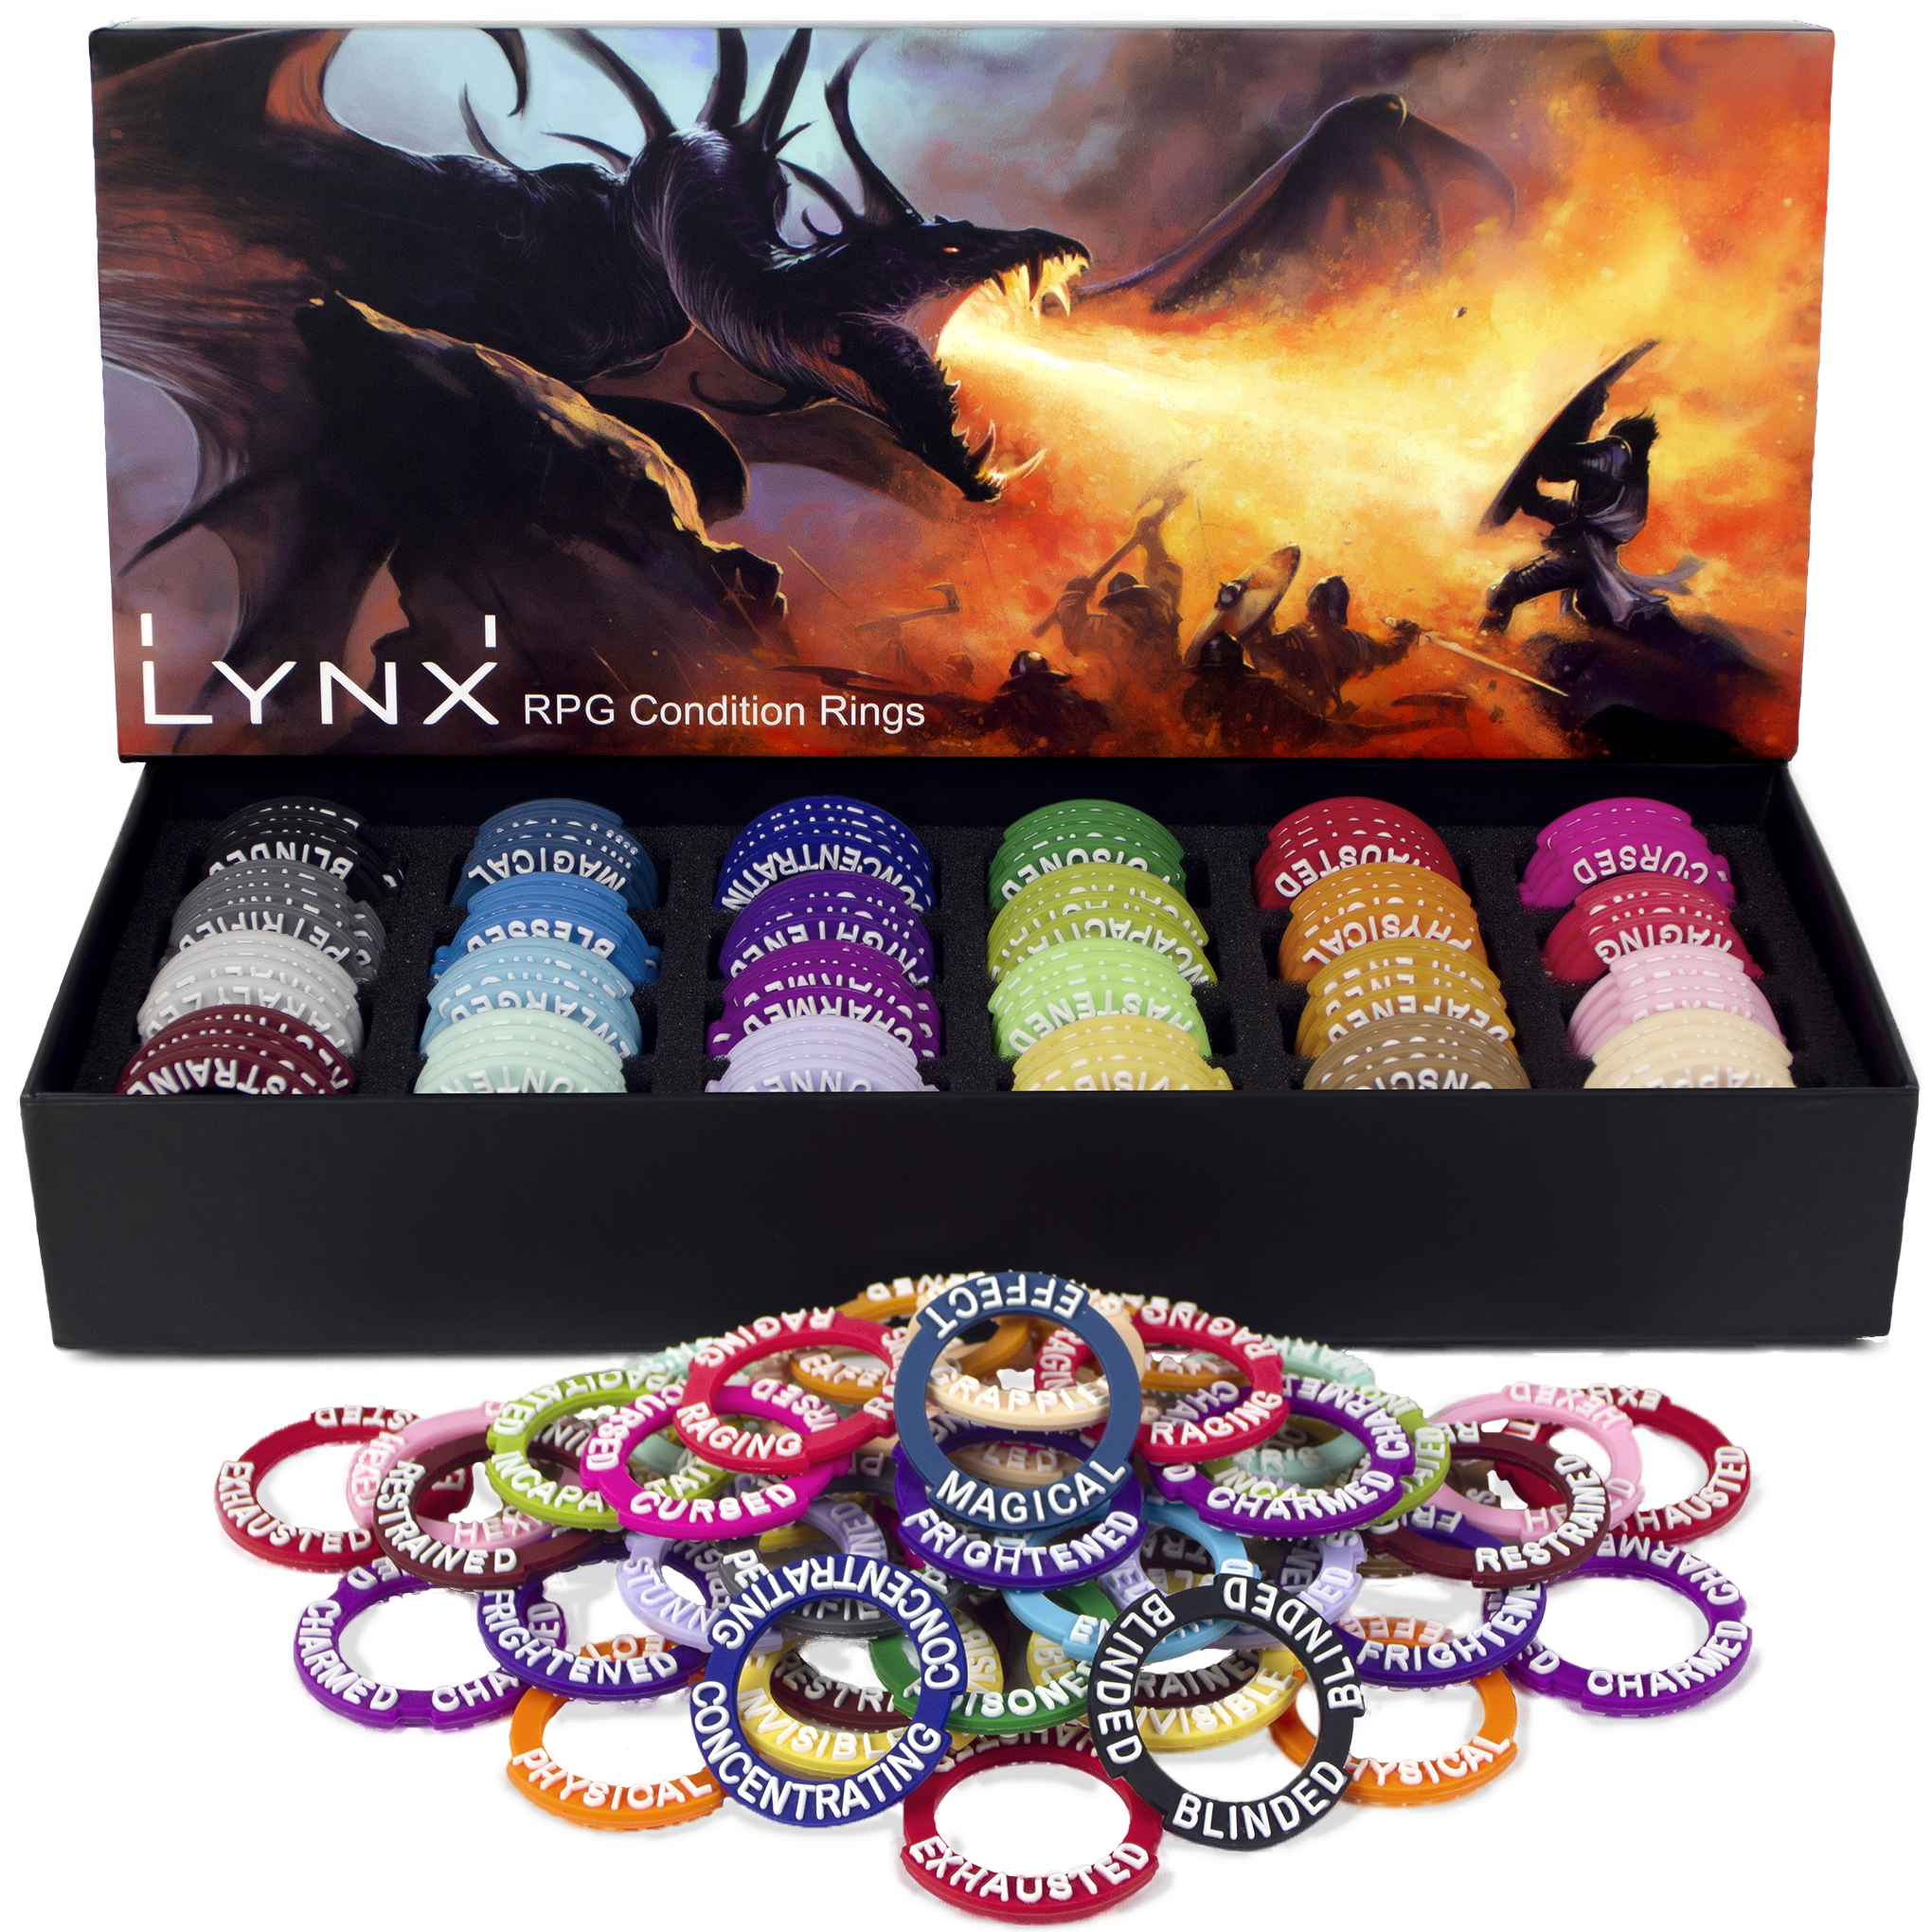 Wholesale of RPG Condition Rings